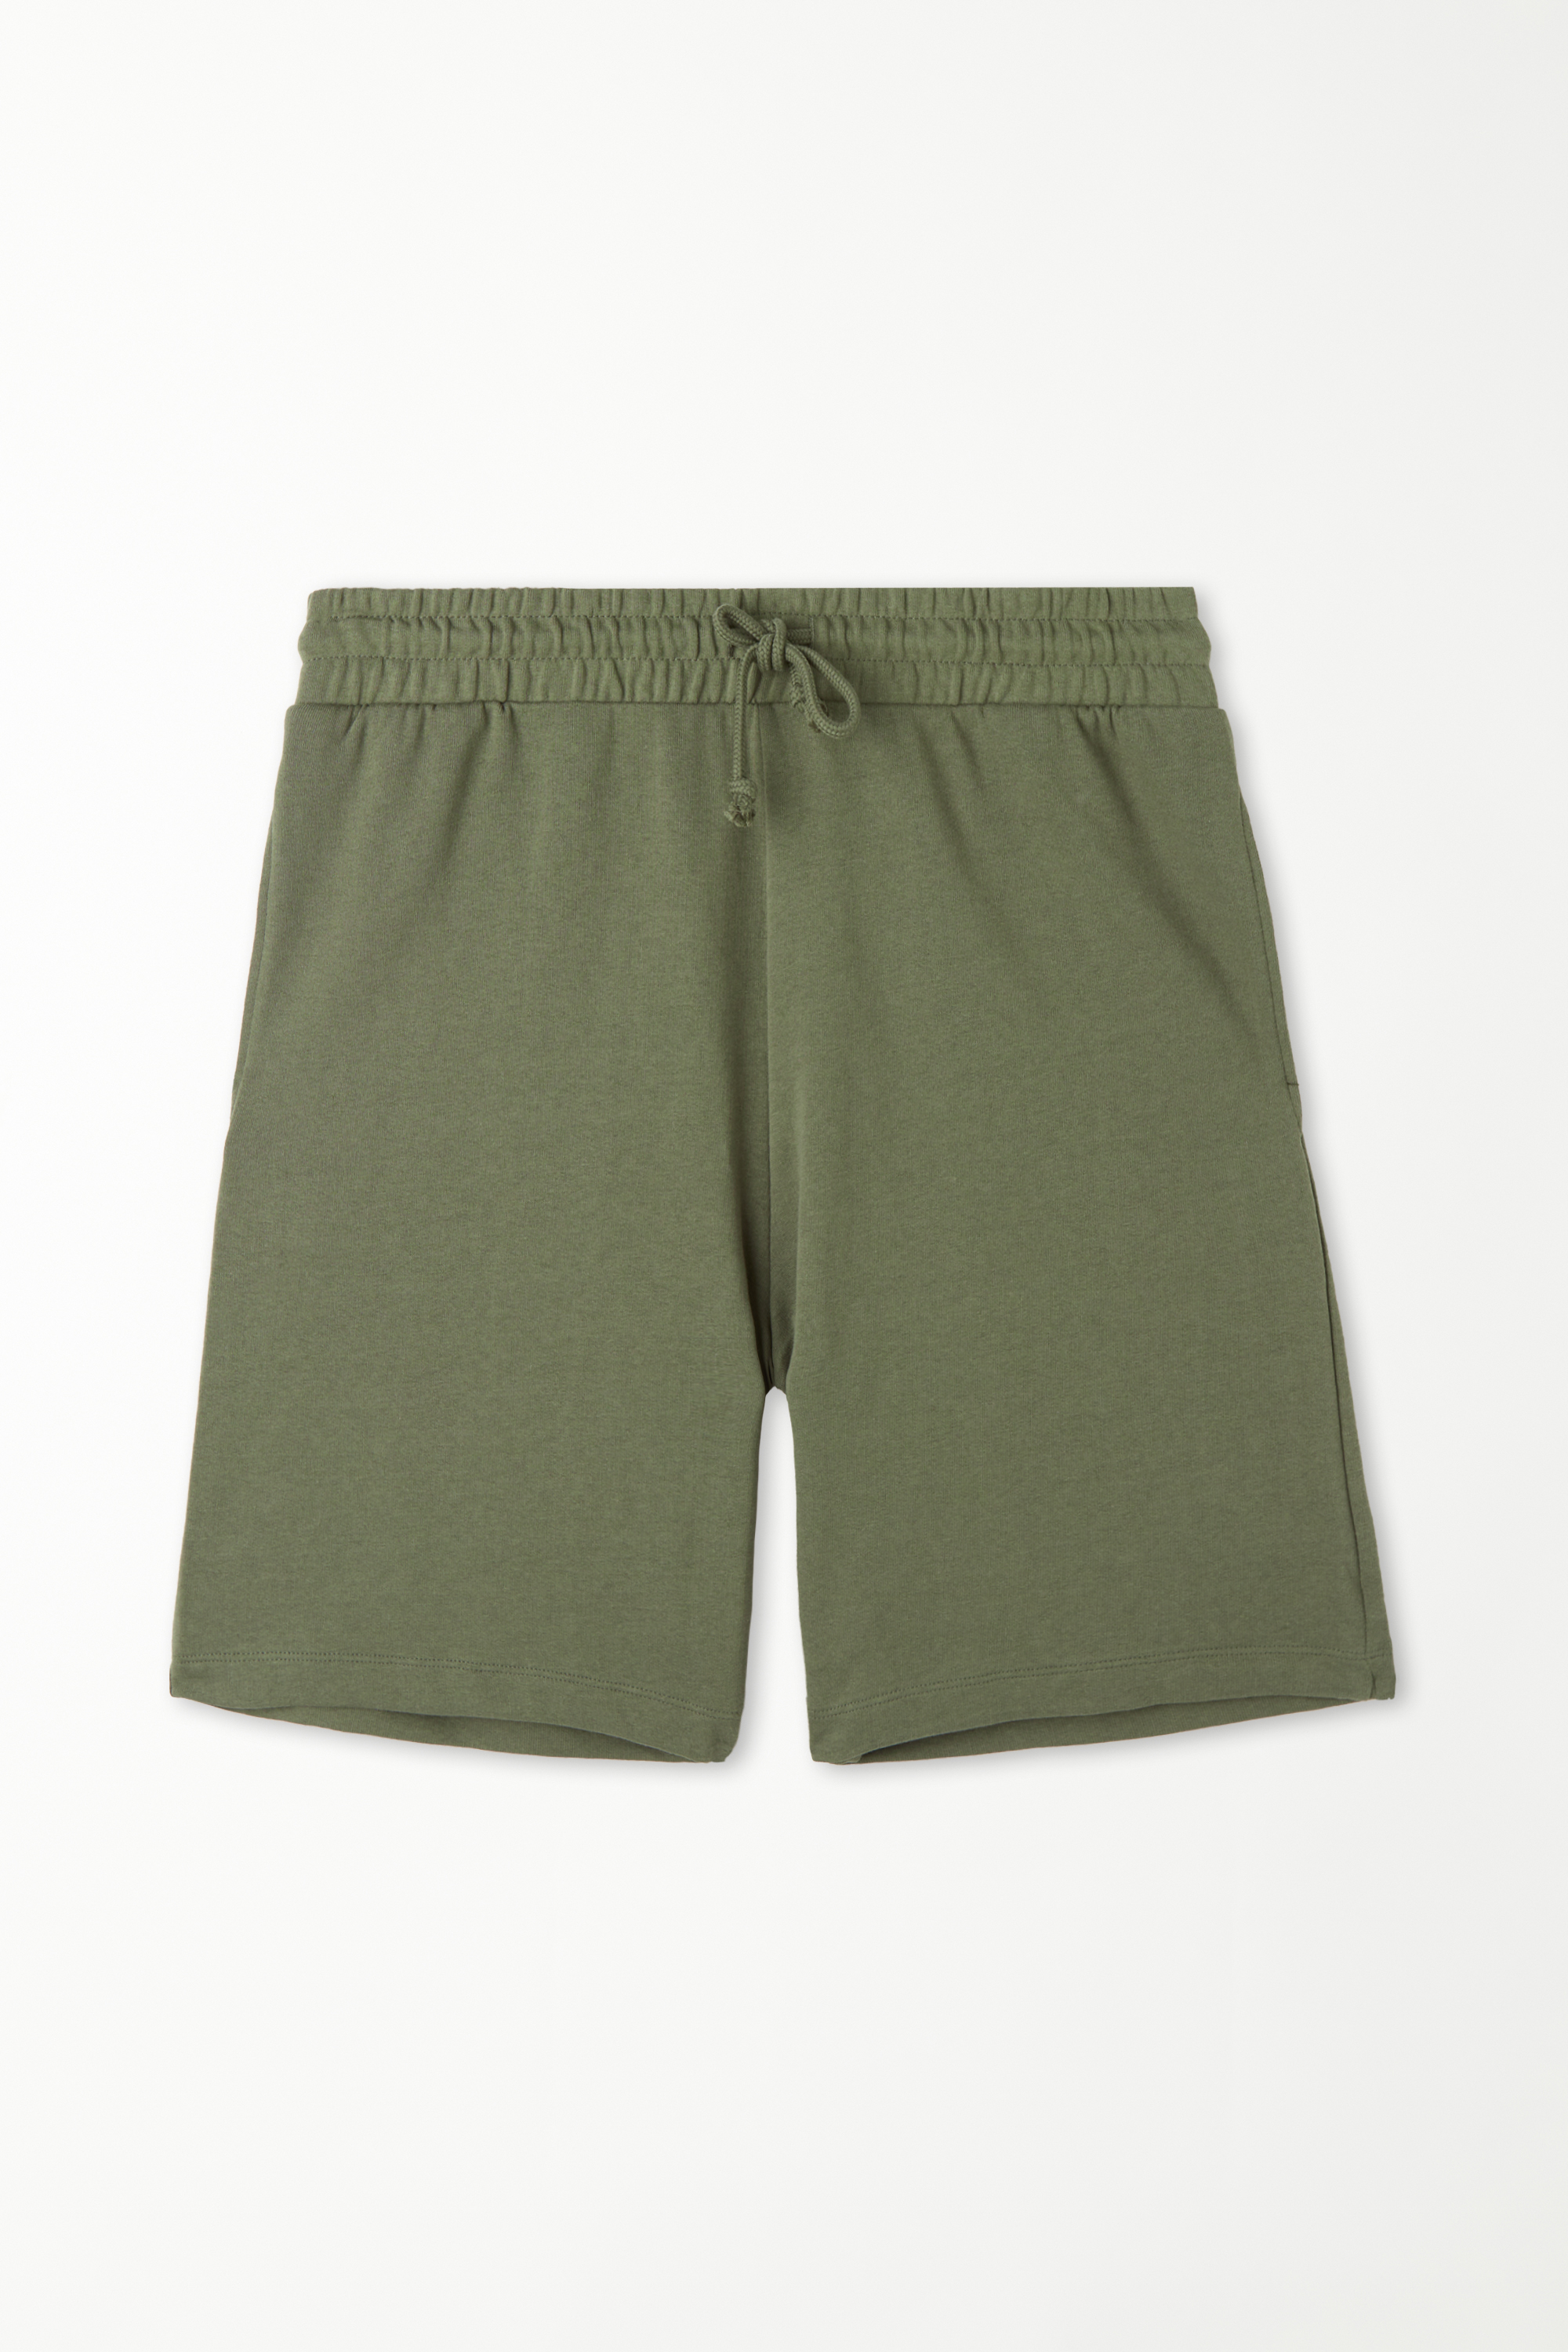 Cotton Fleece Shorts with Pockets